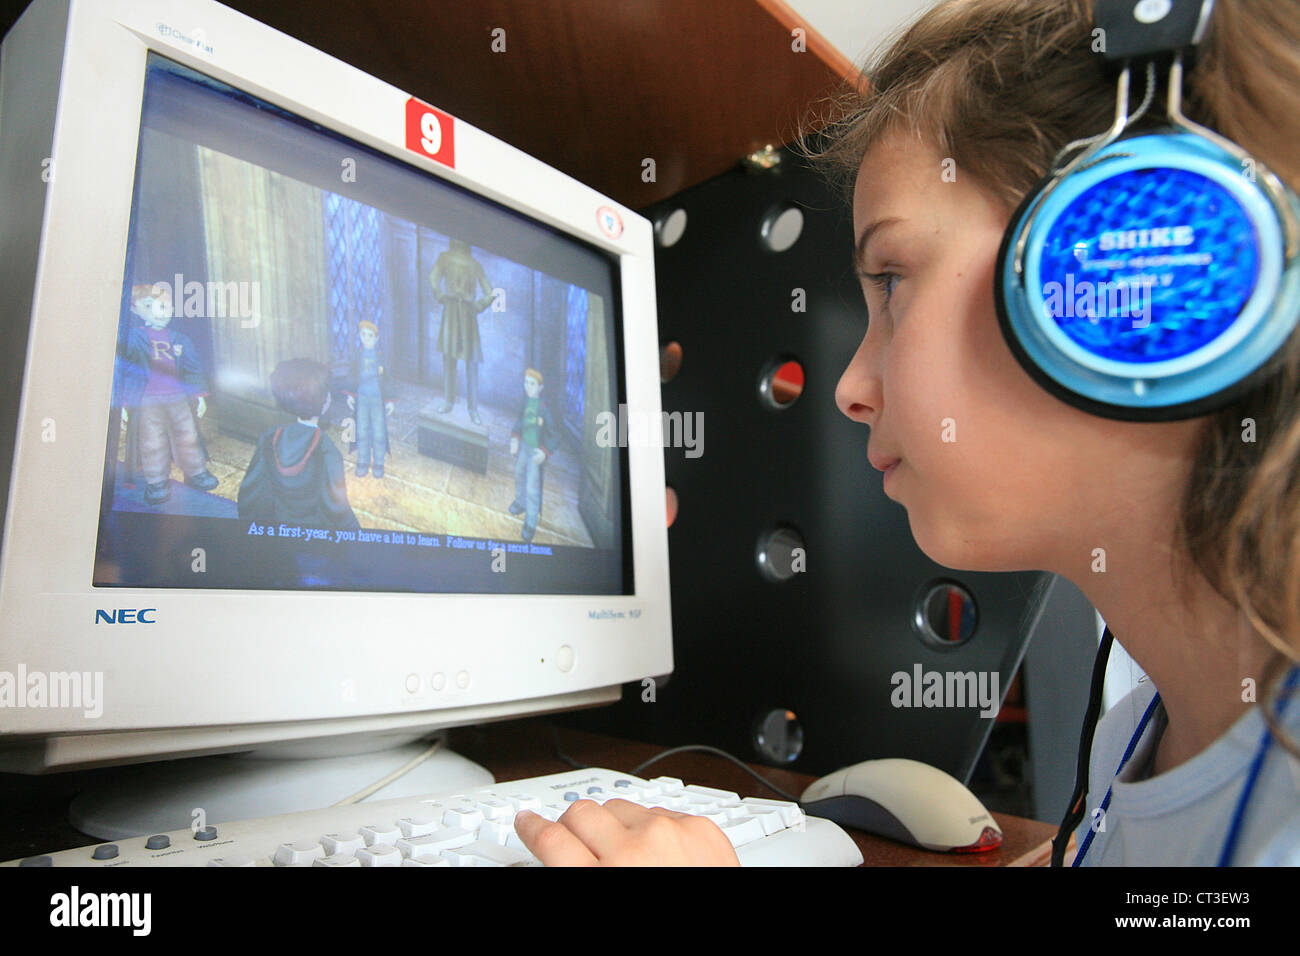 CHILD PLAYING WITH VIDEO GAME Stock Photo